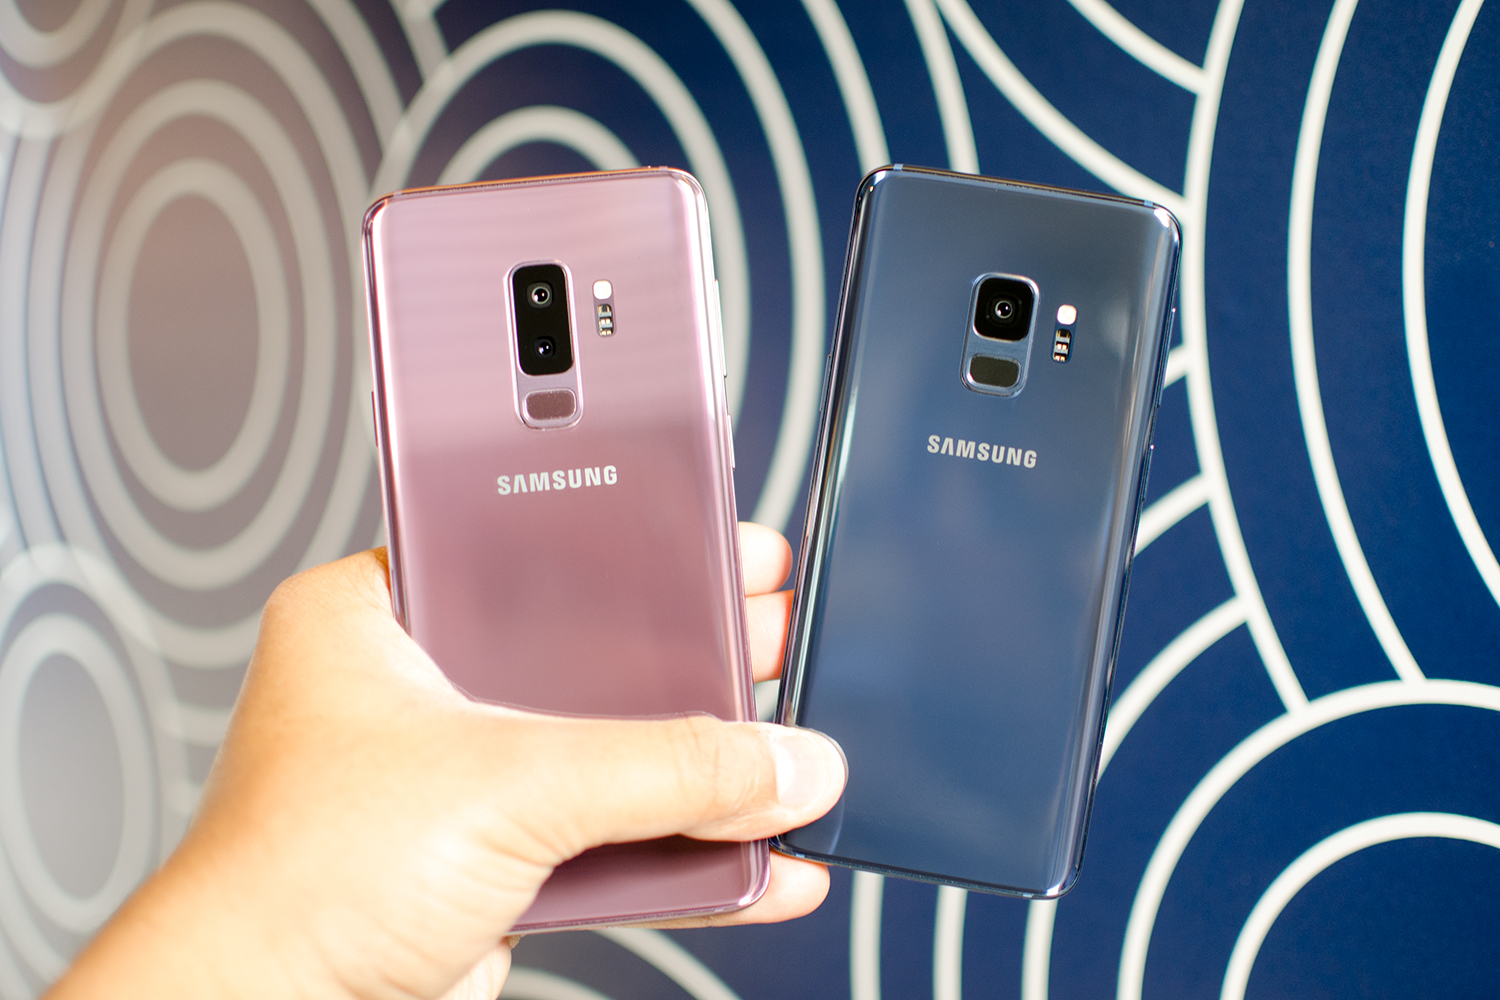 Here's How to Buy the Samsung Galaxy S9 and Galaxy S9 Plus | Digital Trends